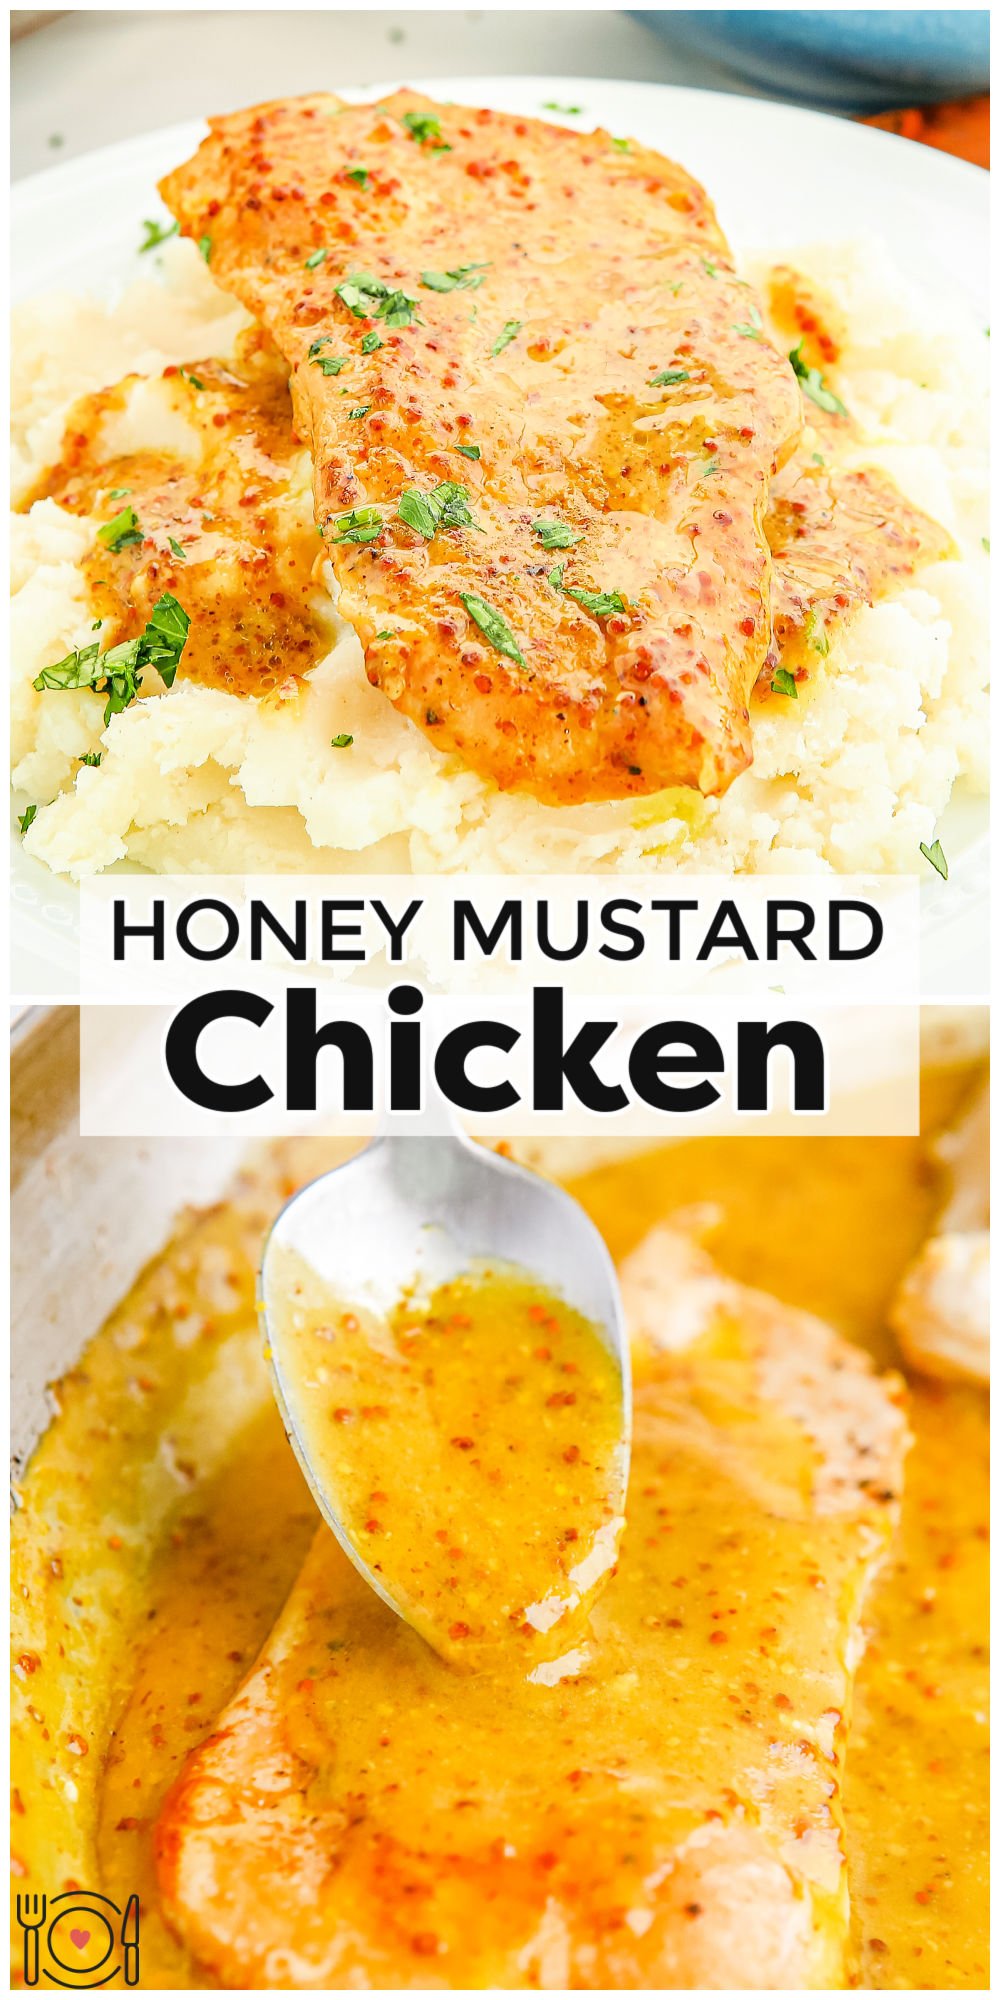 This easy, saucy, tangy, succulent Honey Mustard Chicken recipe is a tasty weeknight meal that everyone will not just love but devour!  via @foodfolksandfun